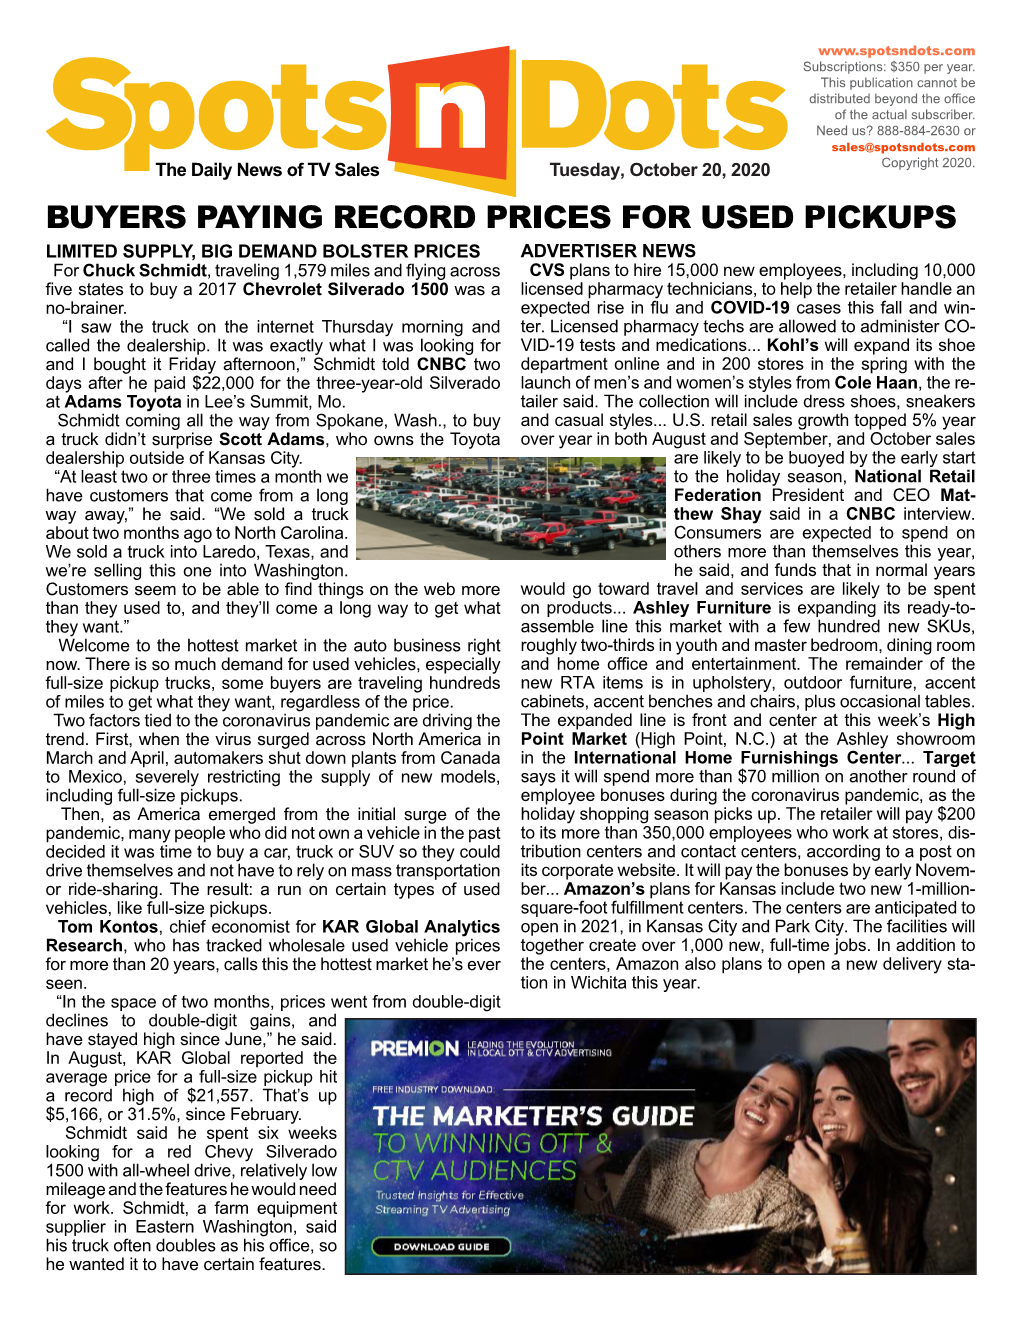 Buyers Paying Record Prices for Used Pickups